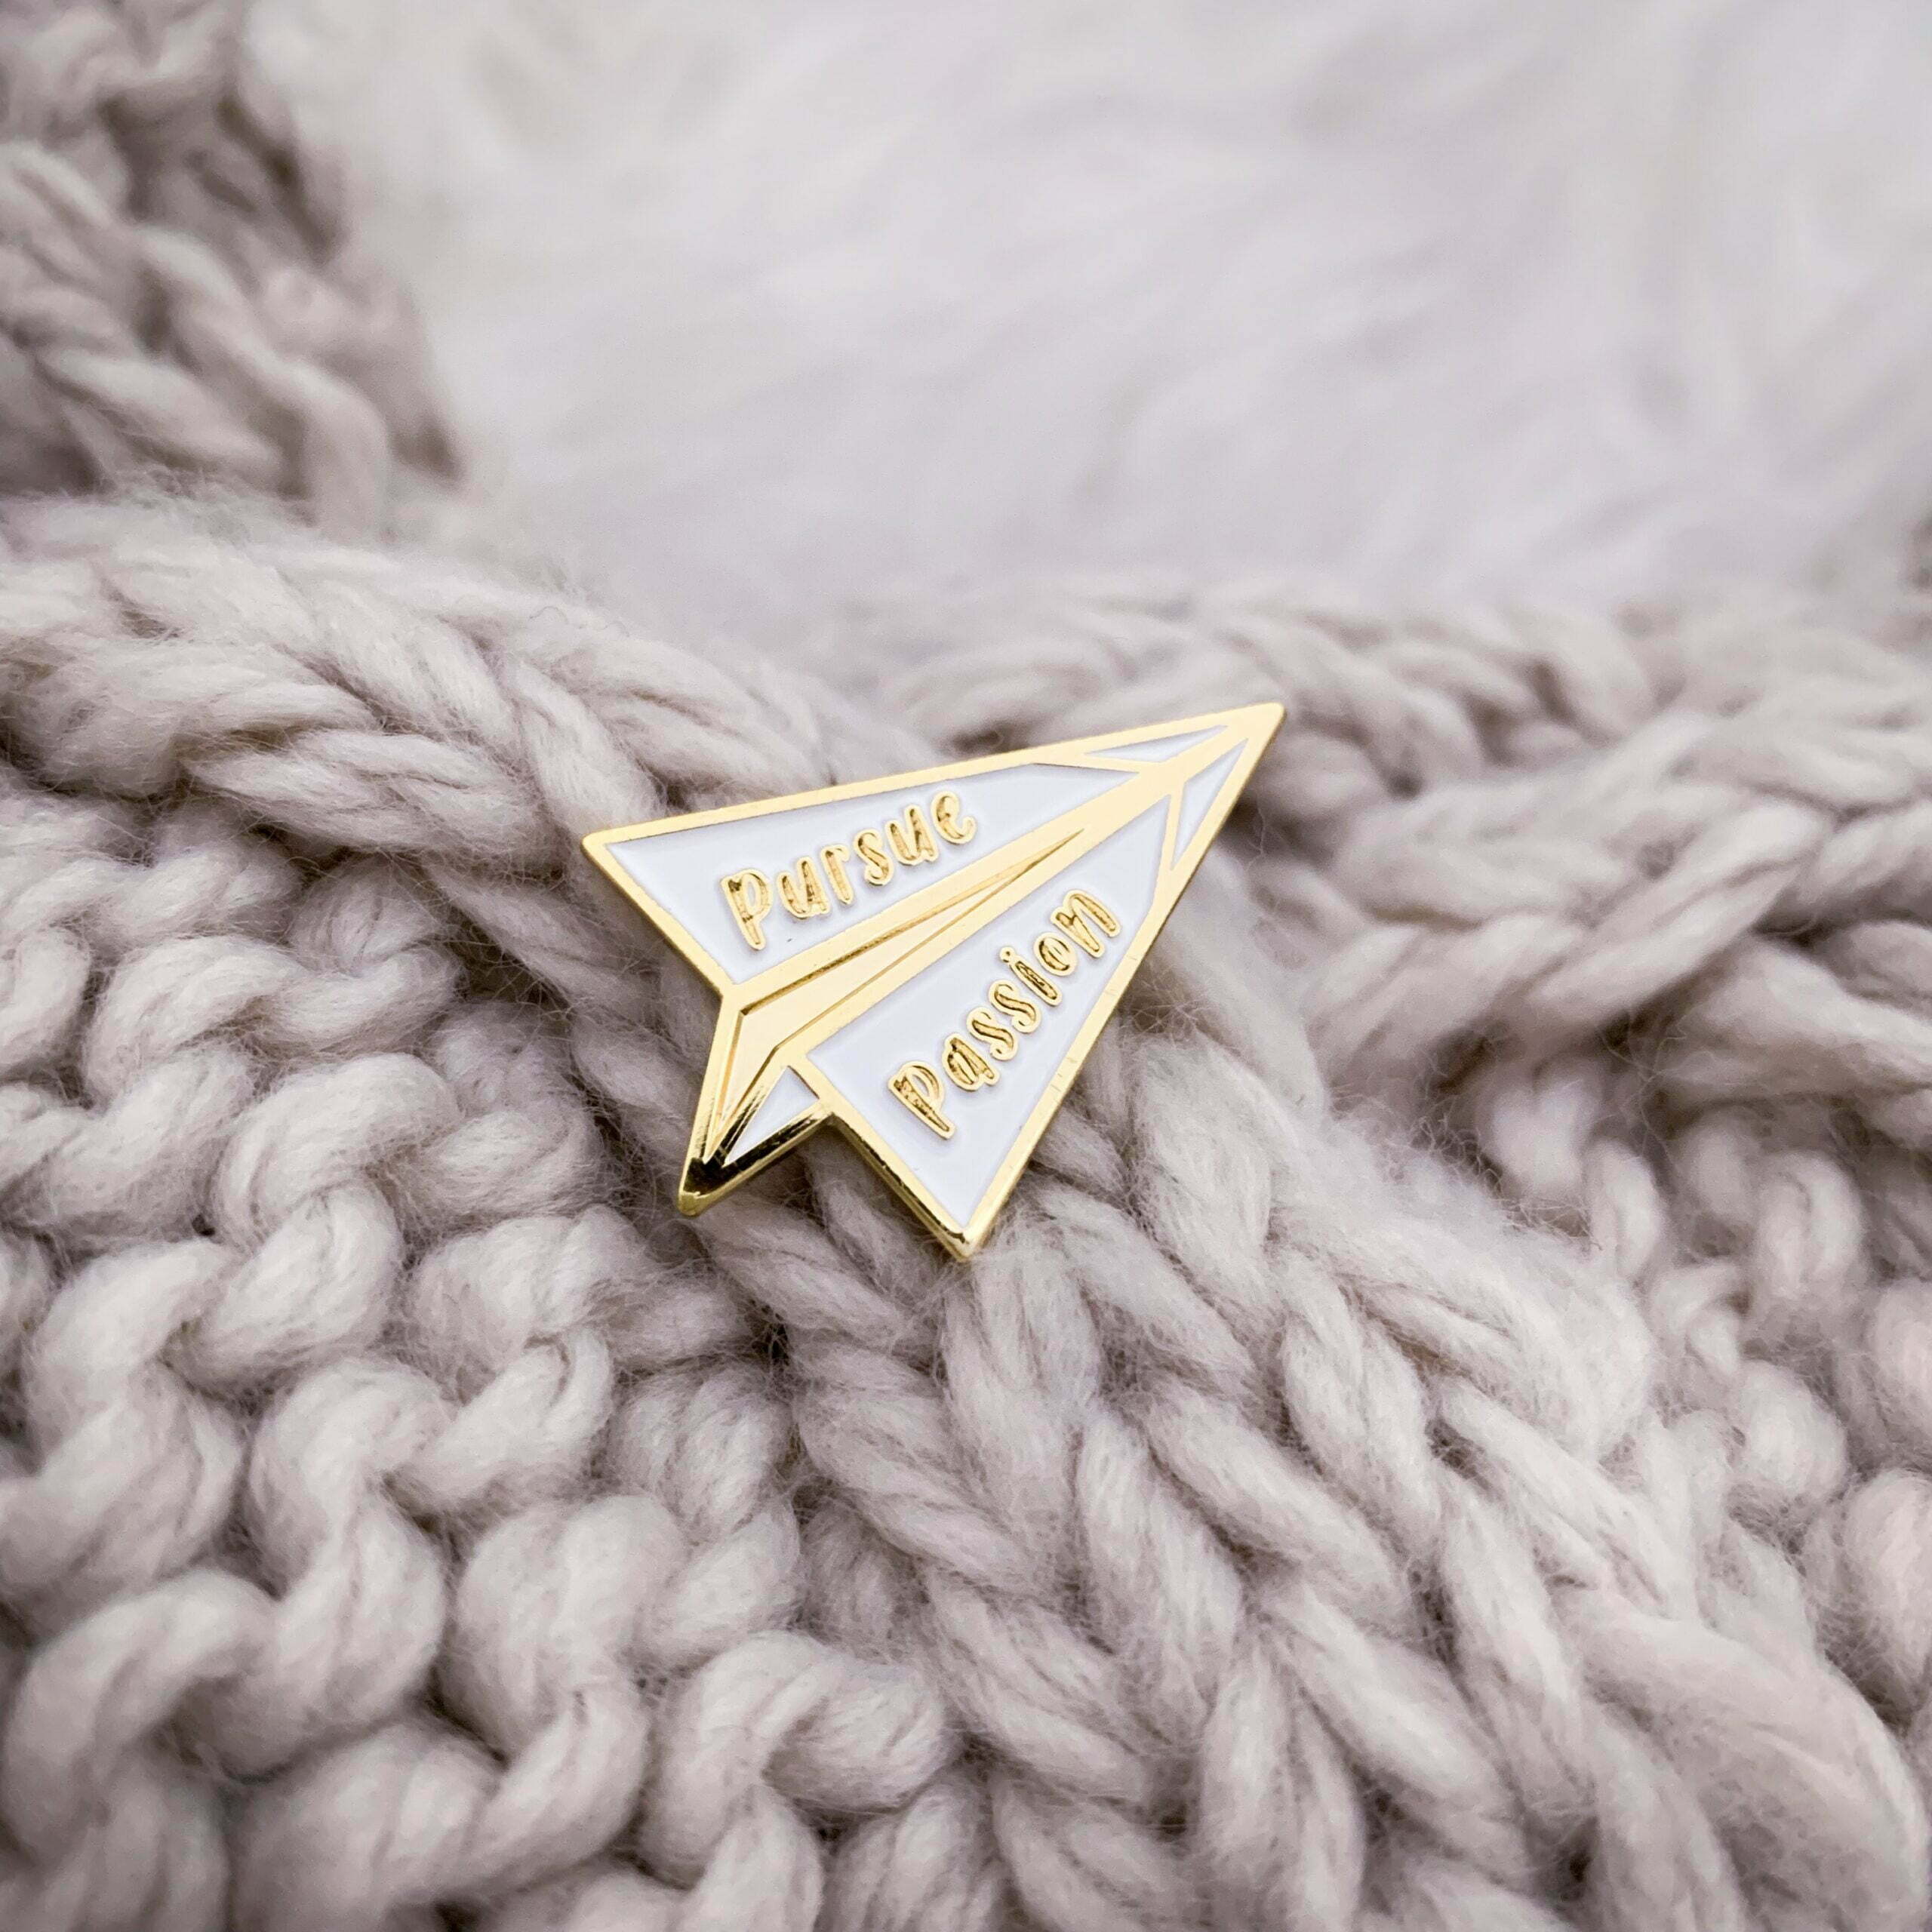 Soft Enamel Pin, Gold Plated with Enamel Colour Fill